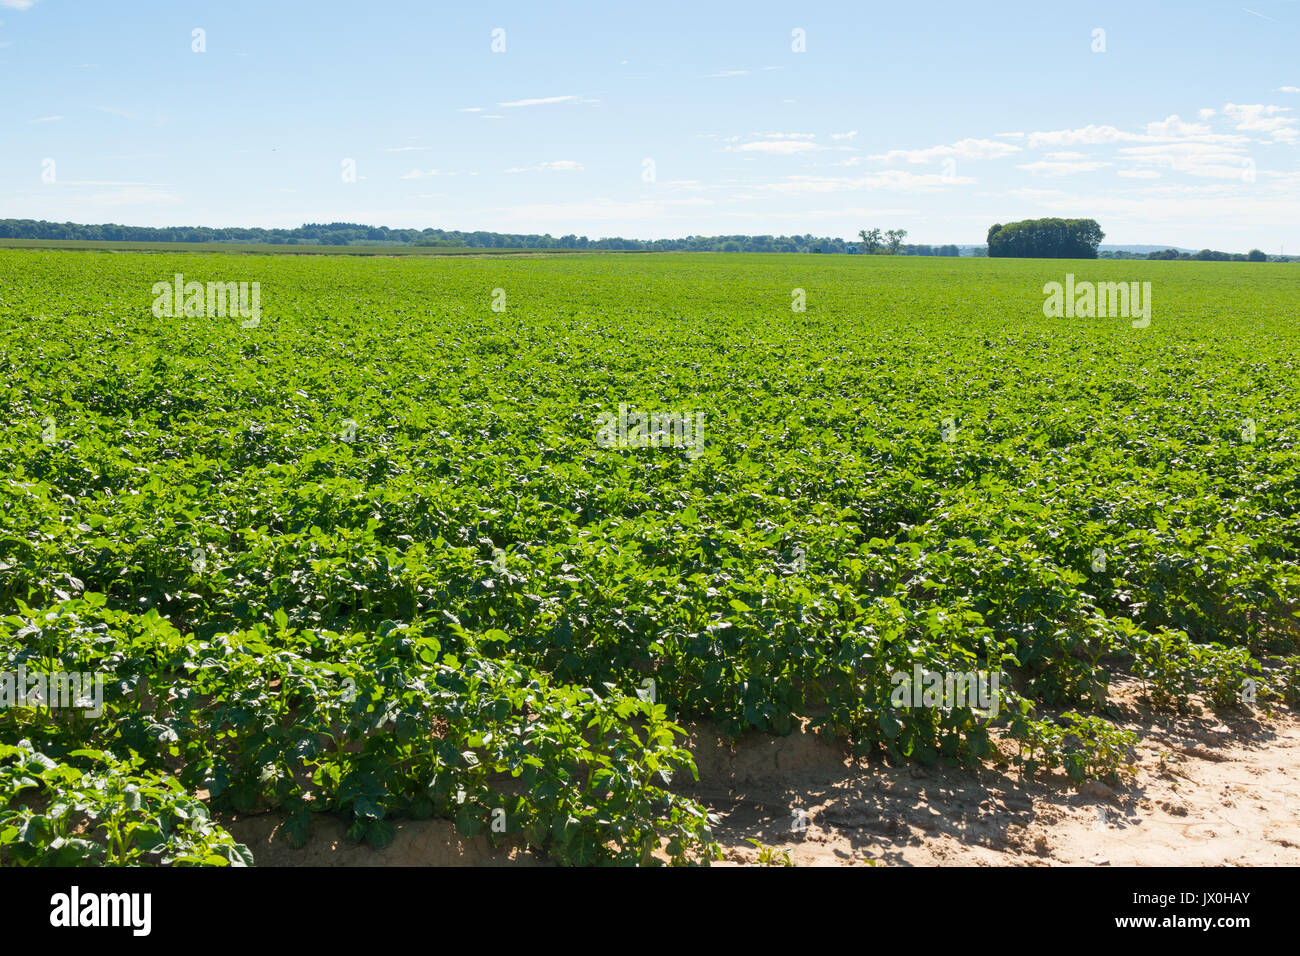 Large potato field with potato plants planted in nice straight rows Stock Photo